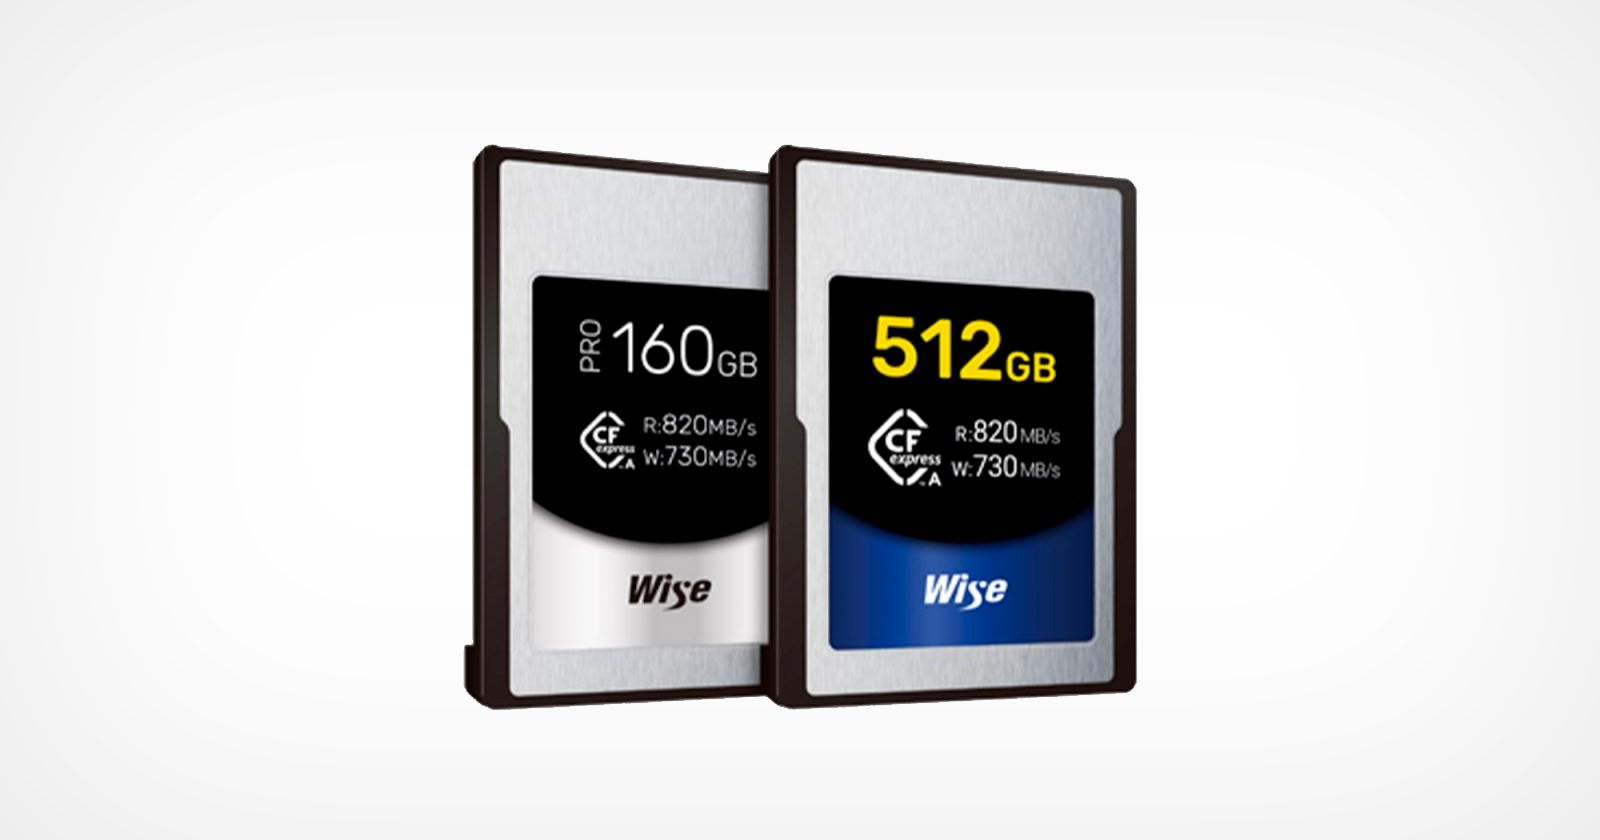  wise launches its first cfexpress type cards 